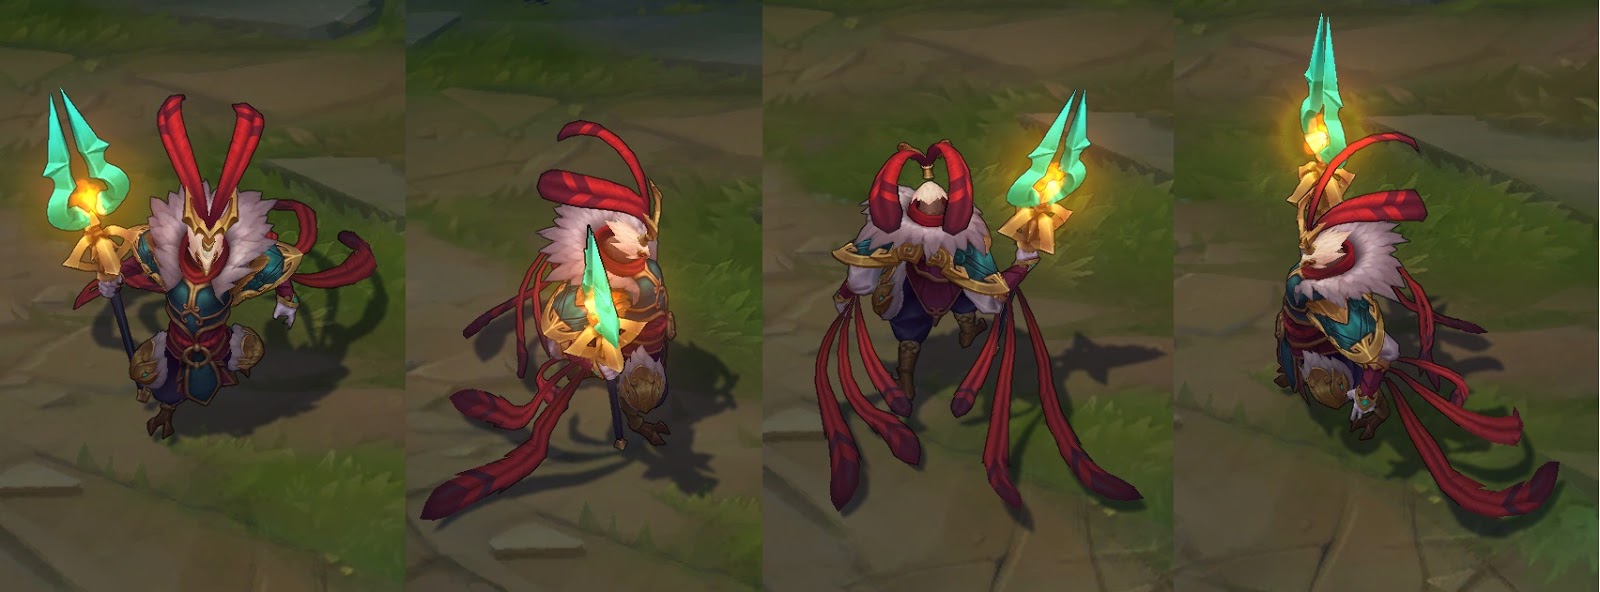 Warring Kingdoms Azir skin for league of legends ingame picture